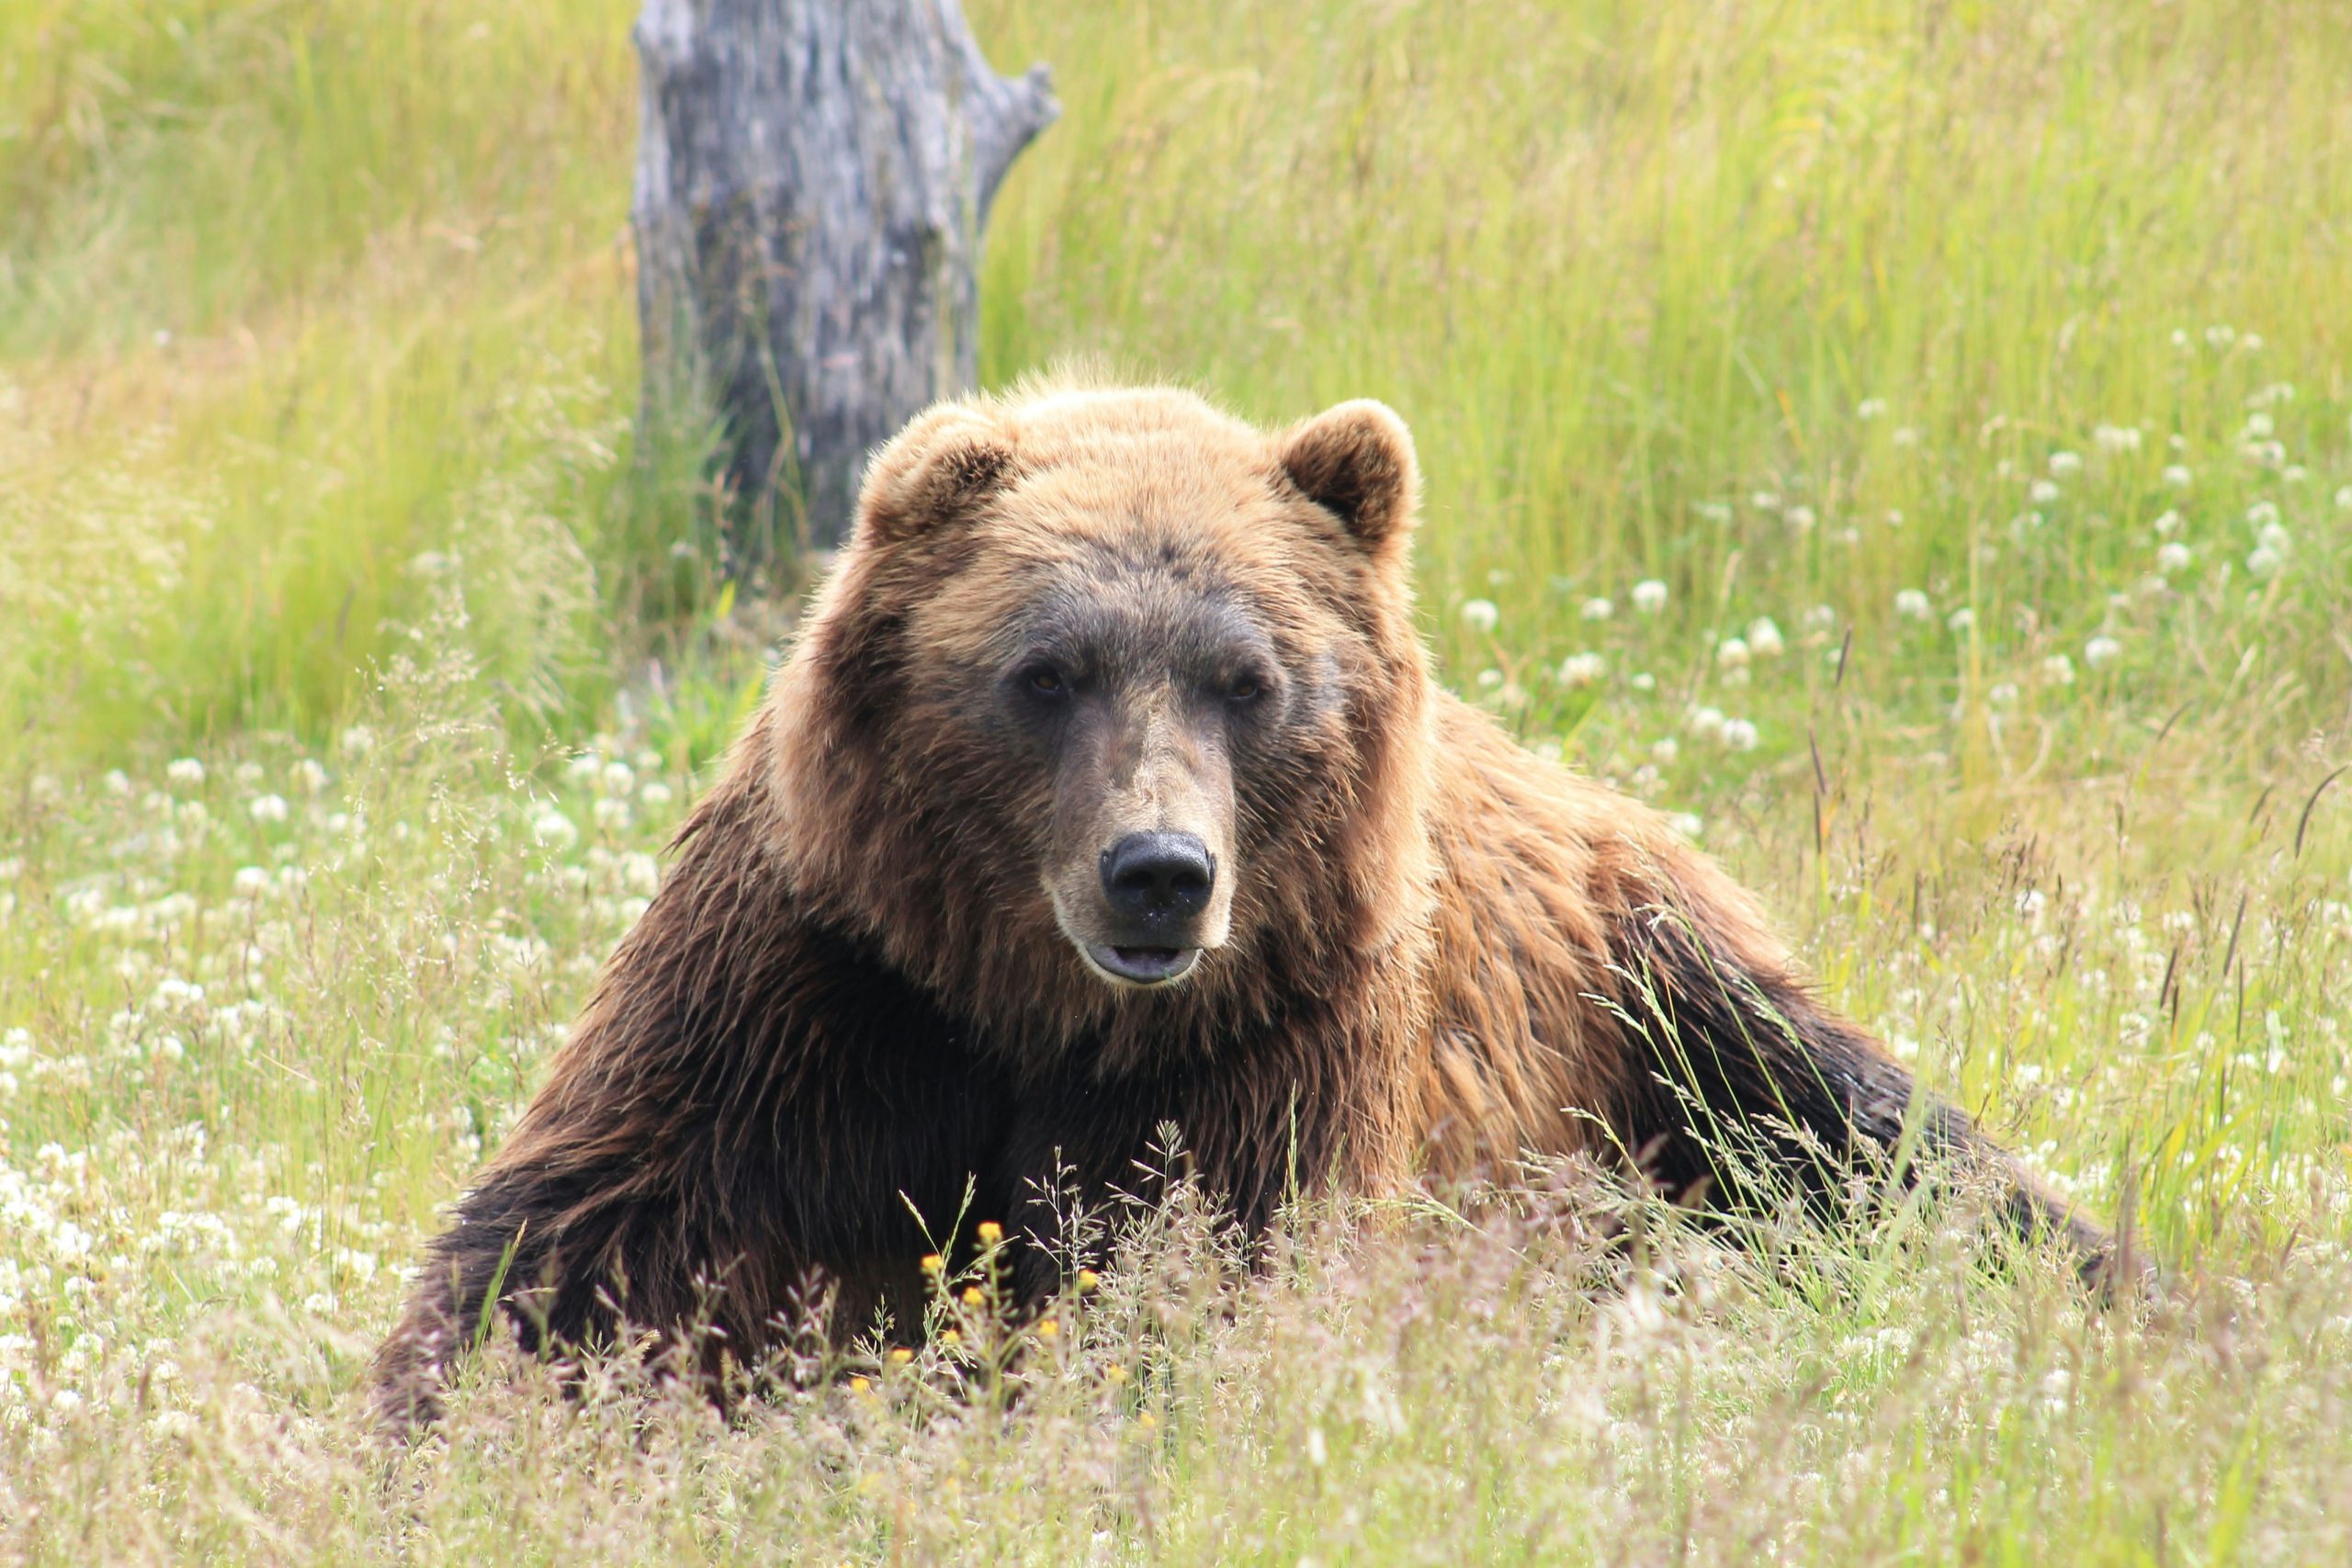 discover tips for safely navigating a bear encounter and learn how to handle unexpected meetings with bears in the wild.